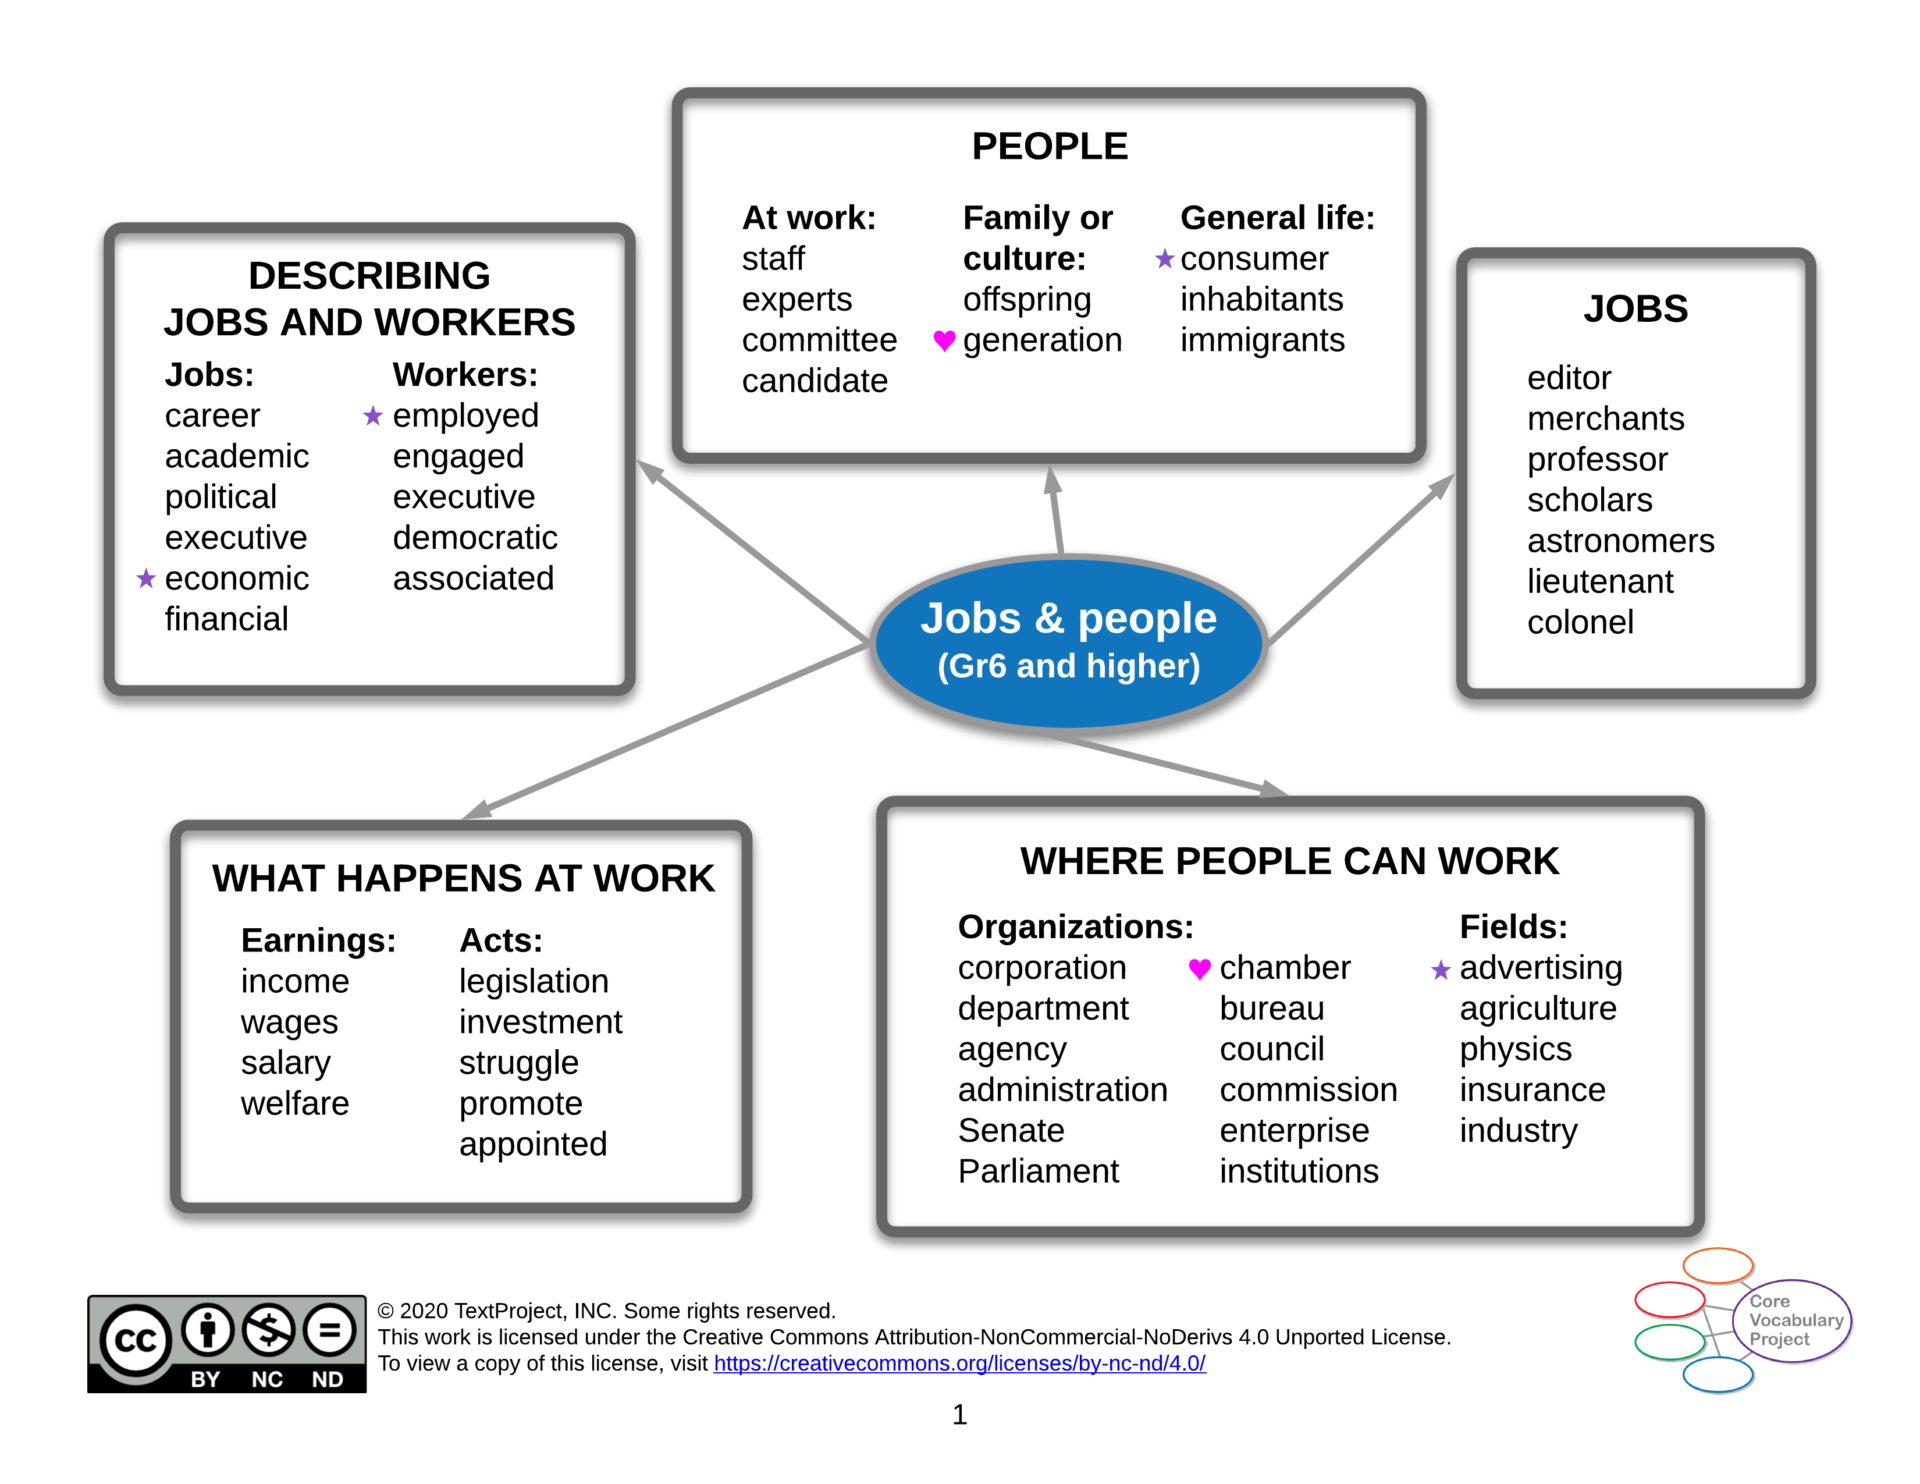 Jobs-and-people-CVP-GR6-higher-Semantic-map.png